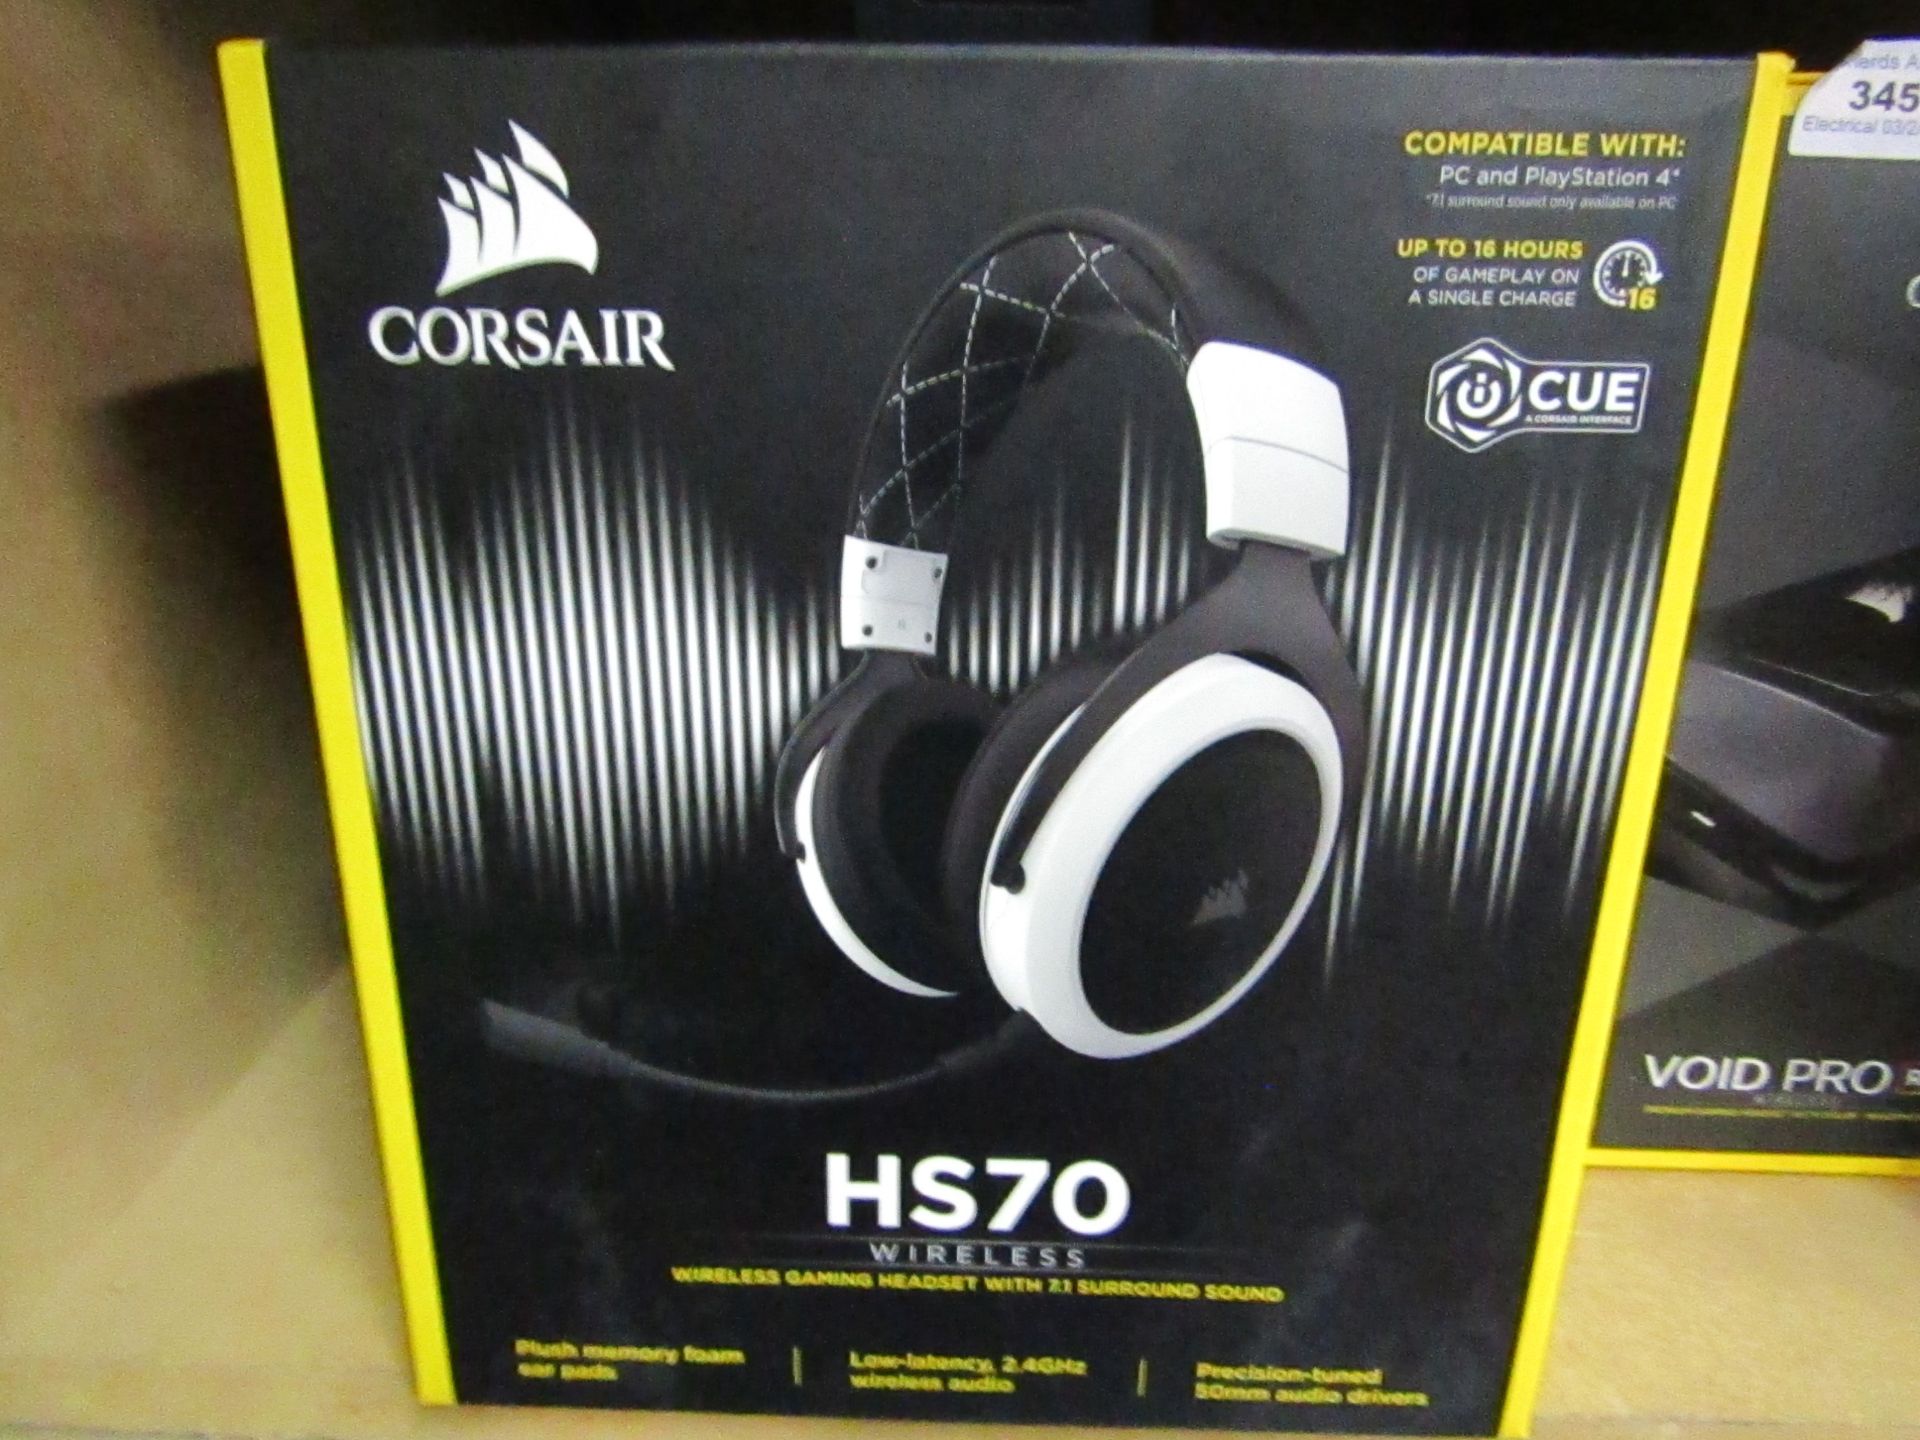 CORSAIR - HS70 Surround Gaming Headset/Mic - Untested and boxed. RRP £69.99.